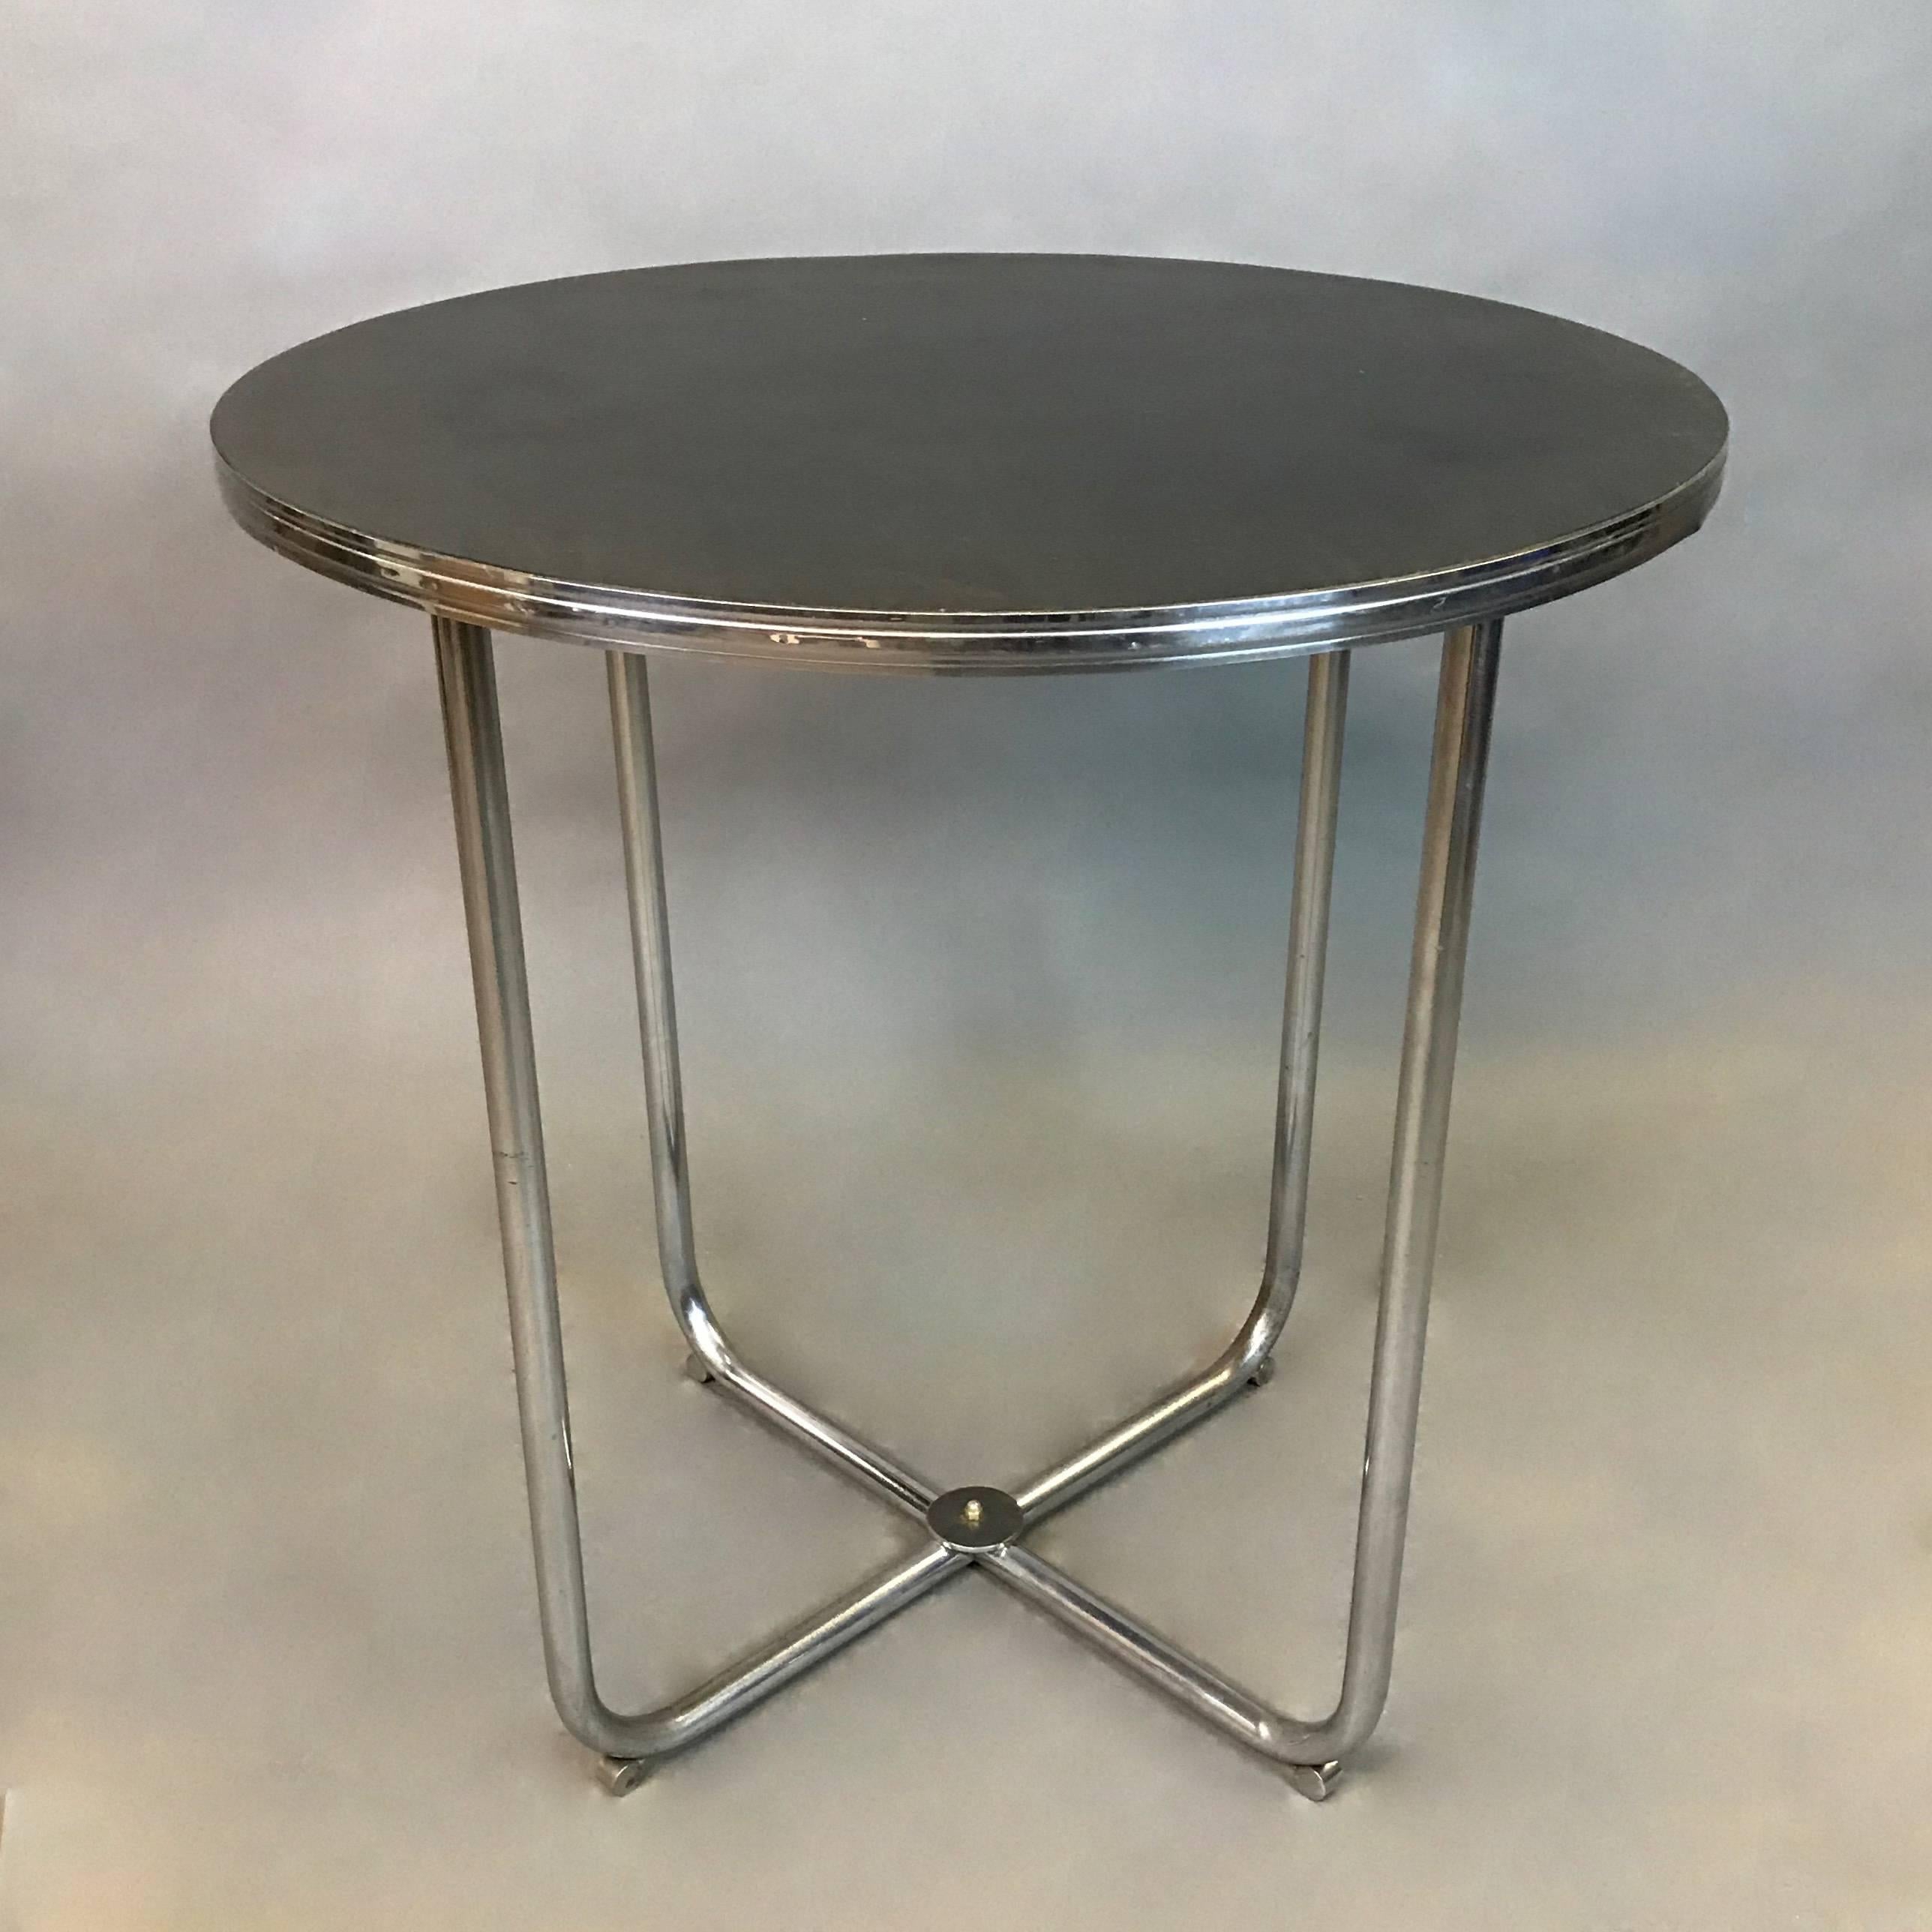 Art Deco, small dining or café table by Gilbert Rohde features a tubular chrome base with black laminate top trimmed in chrome.